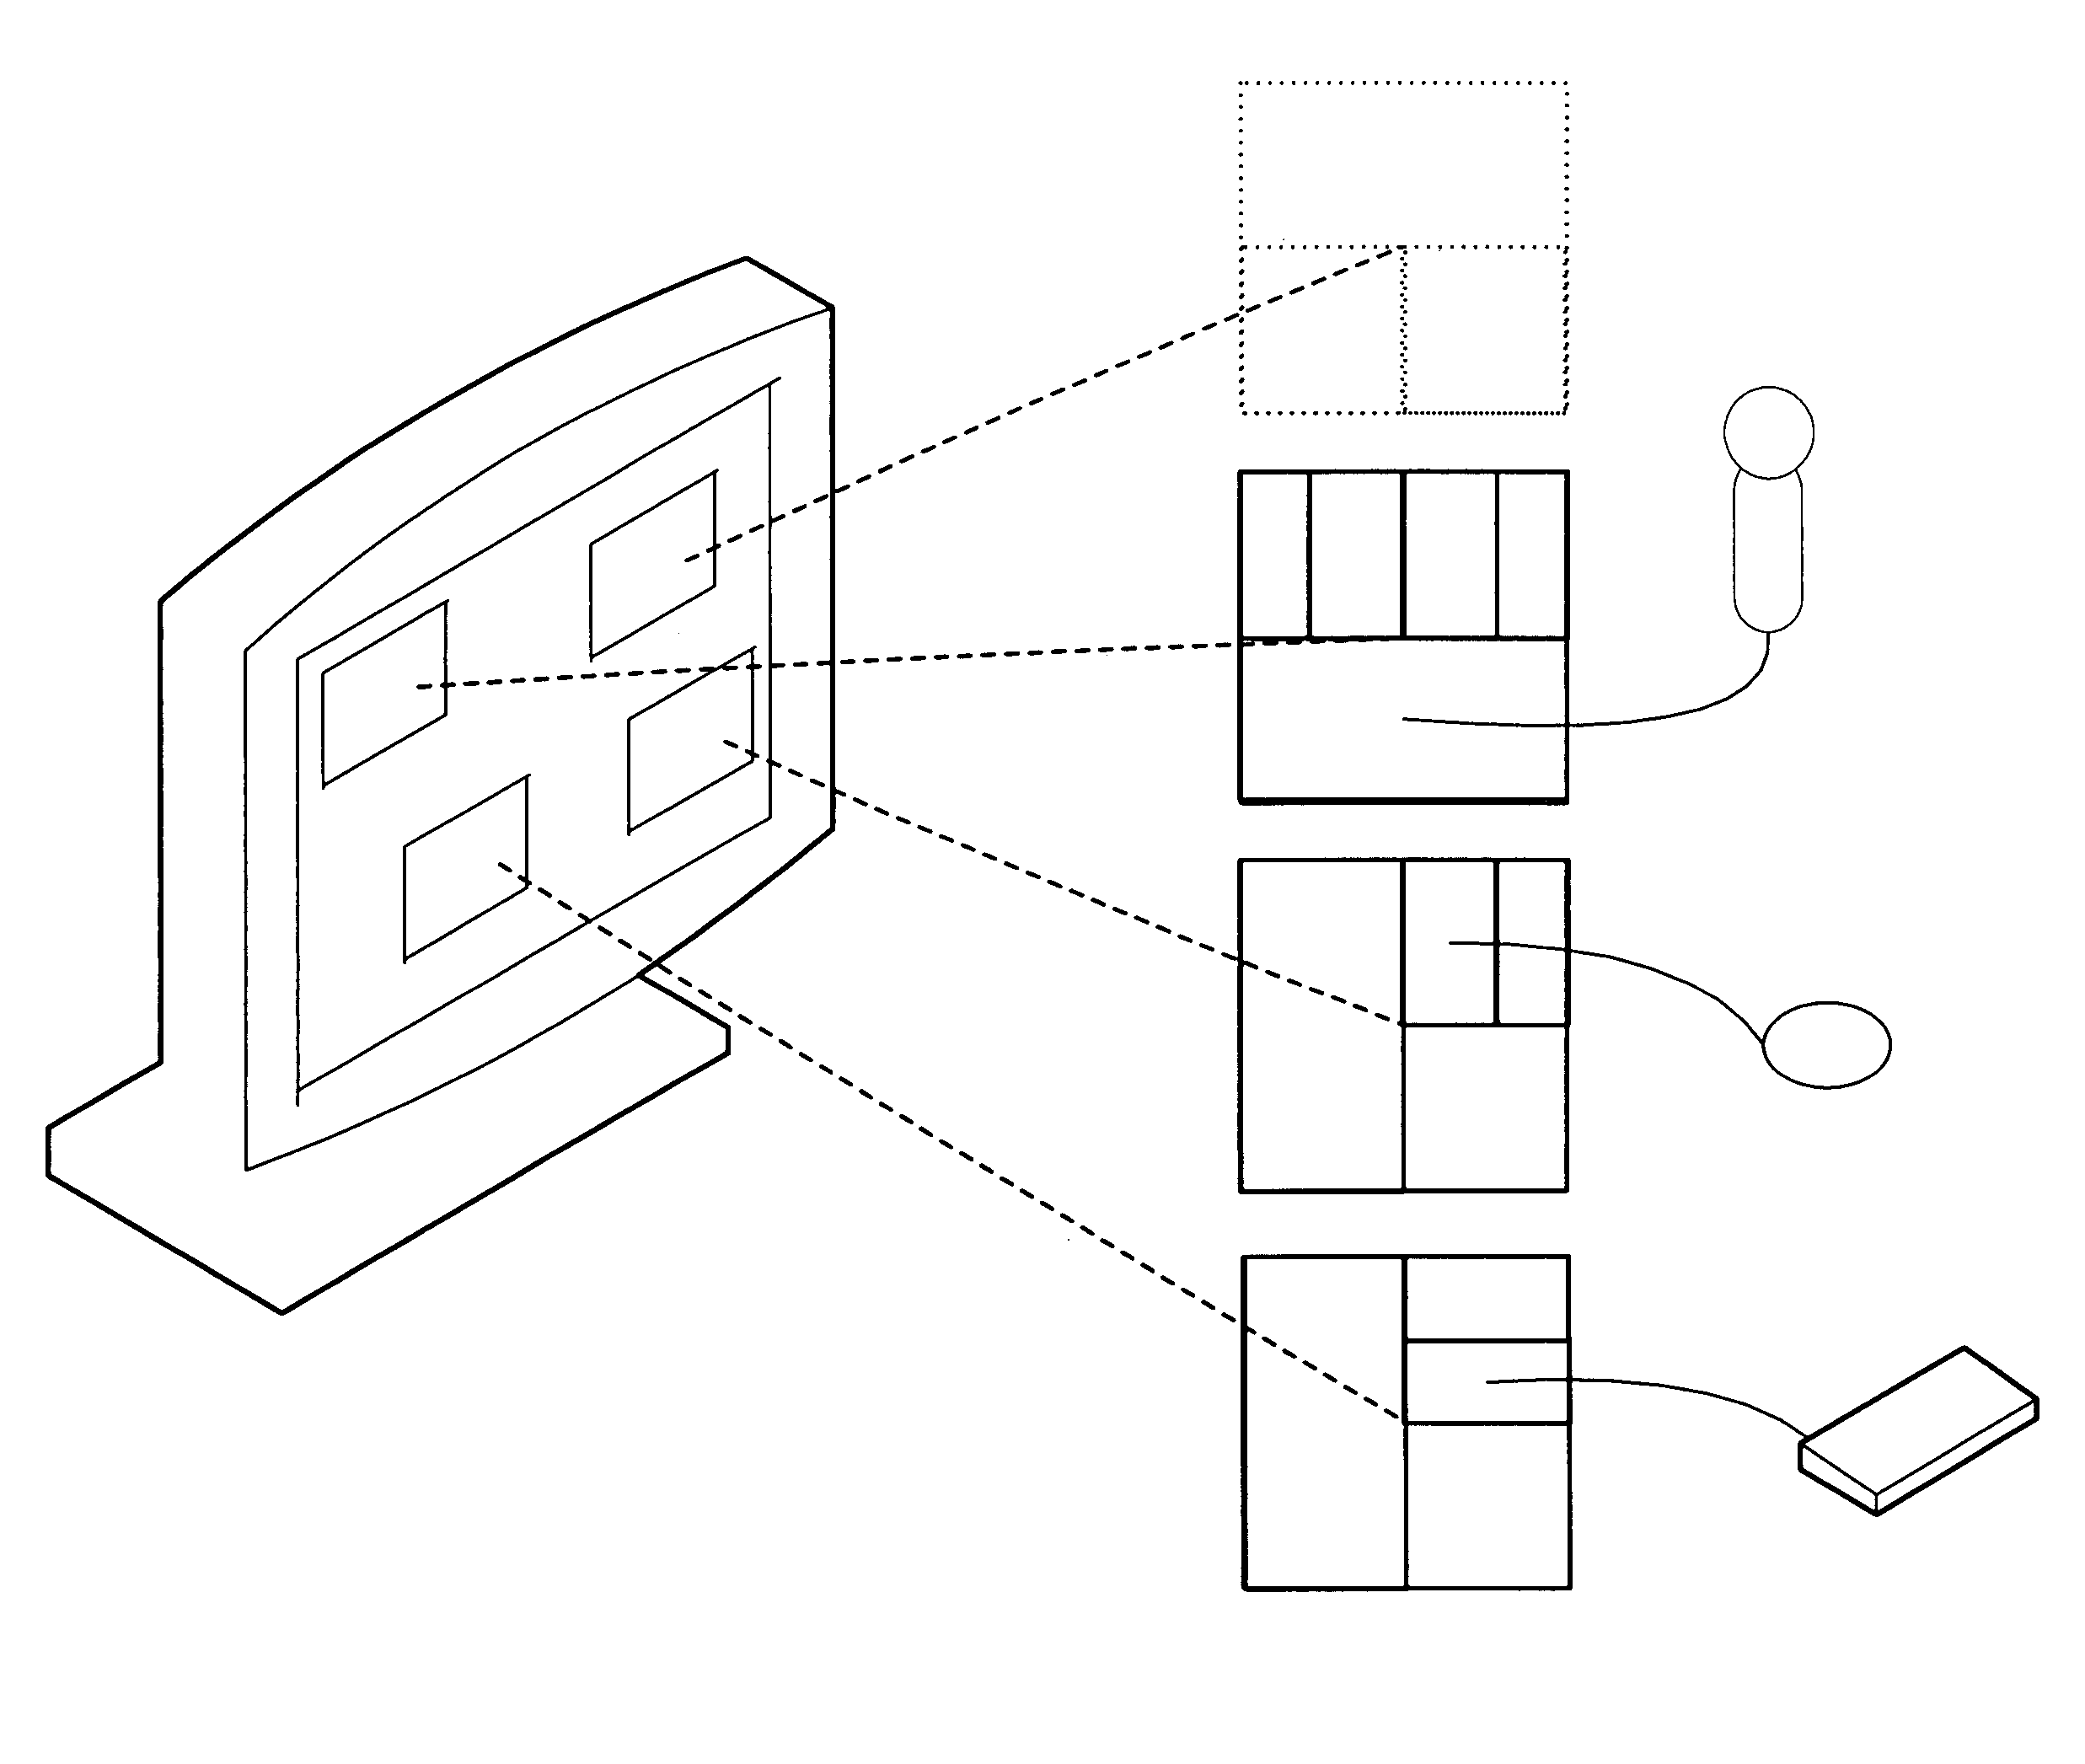 Multiple shell multi faceted graphical user interface